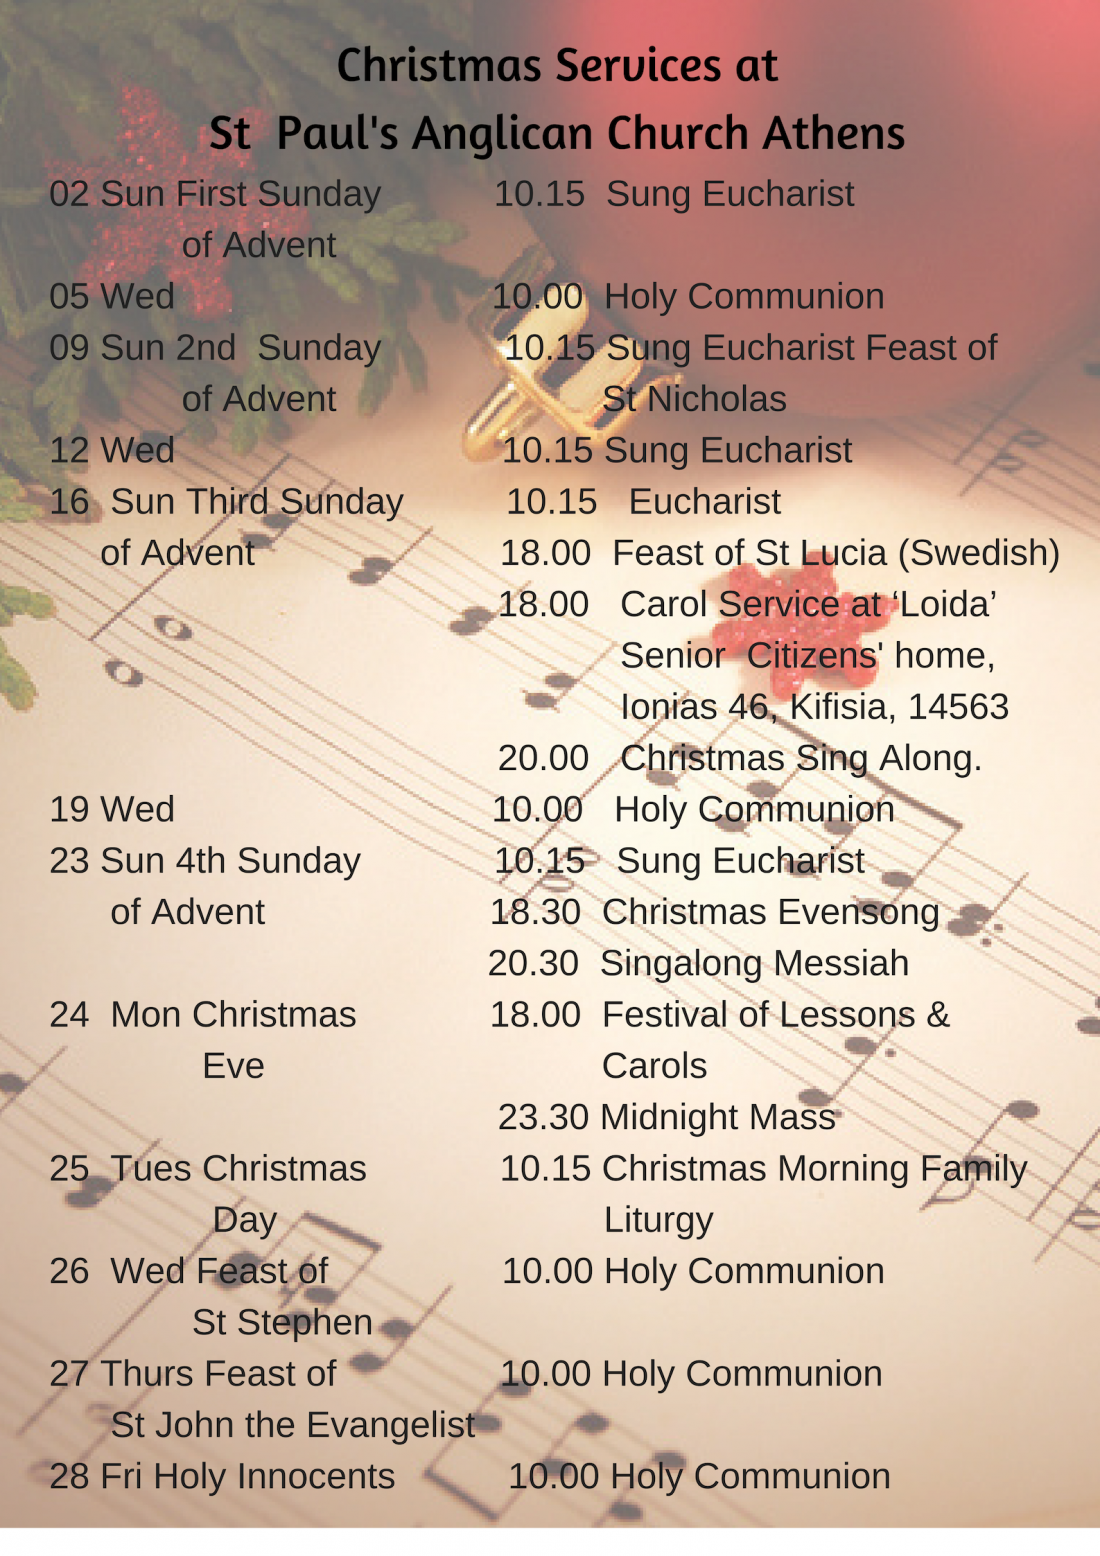 Christmas Services at St Paul's Anglican Church Athens